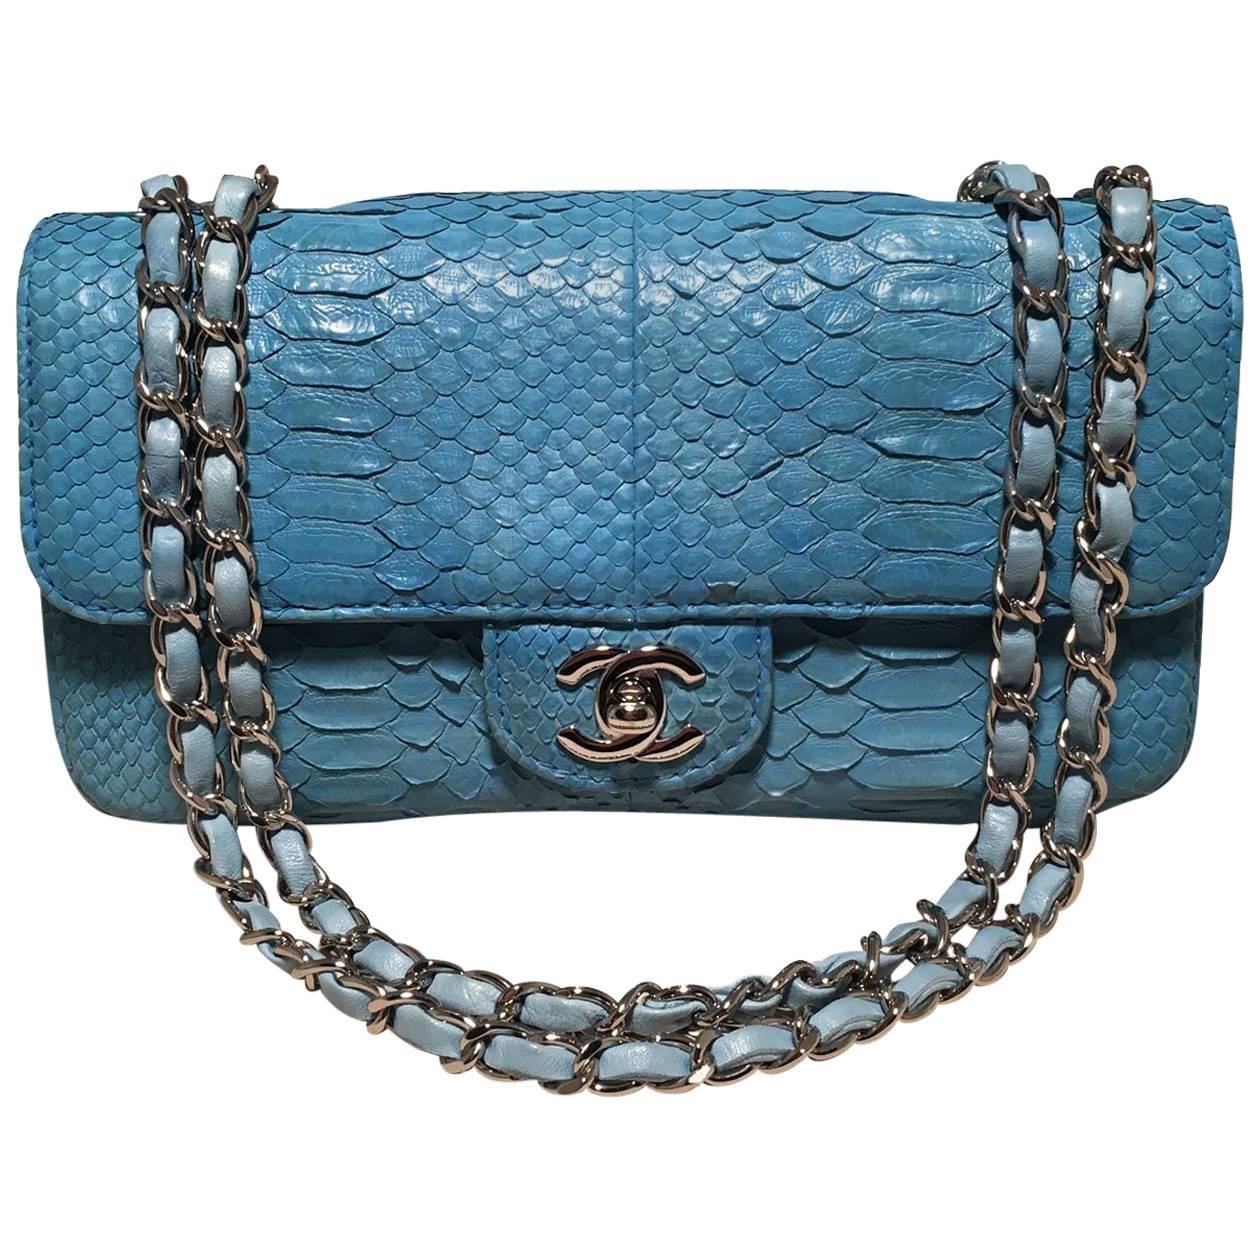 Classic Blue Python Flap Bag - Buy & Consign Authentic Pre-Owned